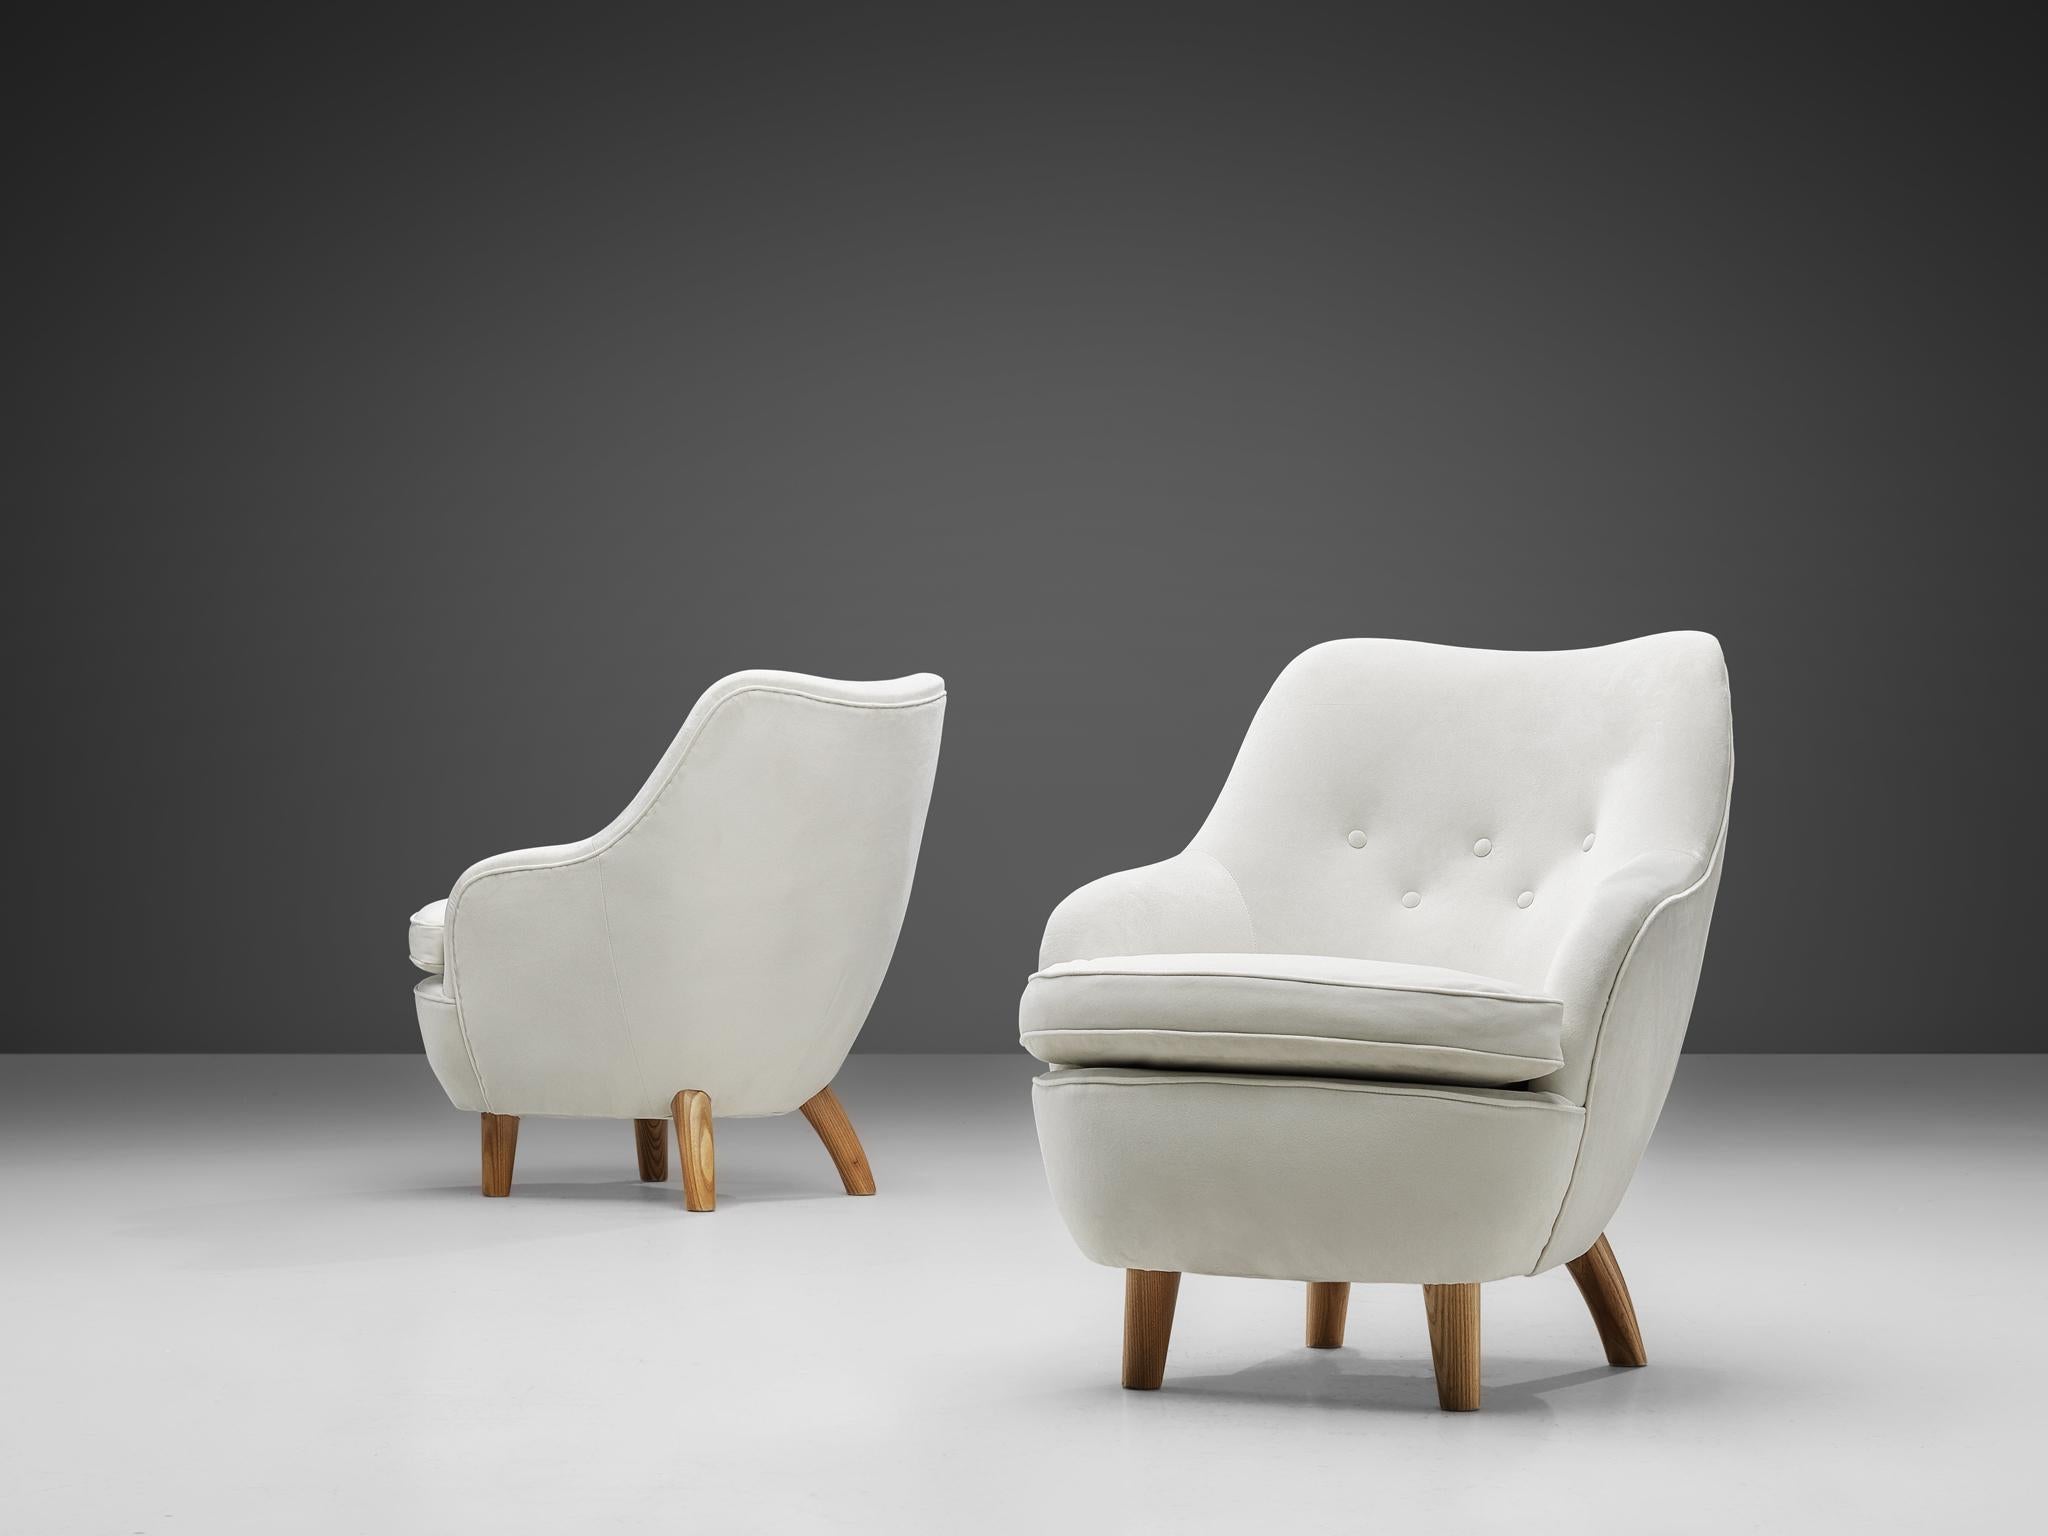 Runar Engblom, pair of armchairs, ivory white ultrasuede upholstery, elm, Finland, 1950s

Rare pair of armchairs designed by Runar Engblom in 1951. The chairs have a distinct appearance with their curved shape and soft and organic angles. They are